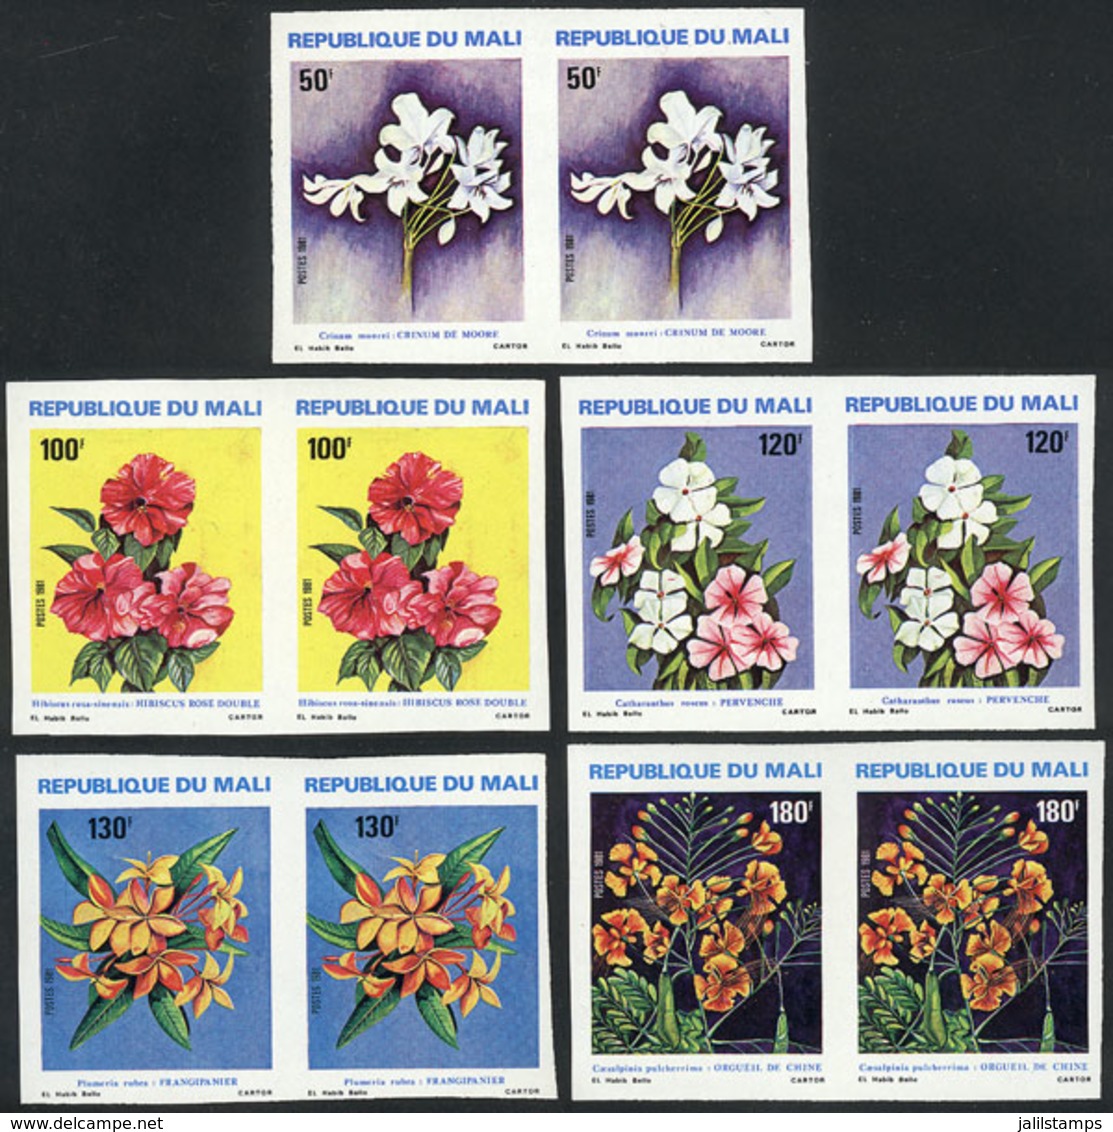 MALI: Yvert 412/416, 1981 Flowers, Complete Set Of 5 Values, IMPERFORATE PAIRS, VF Quality! - Mali (1959-...)